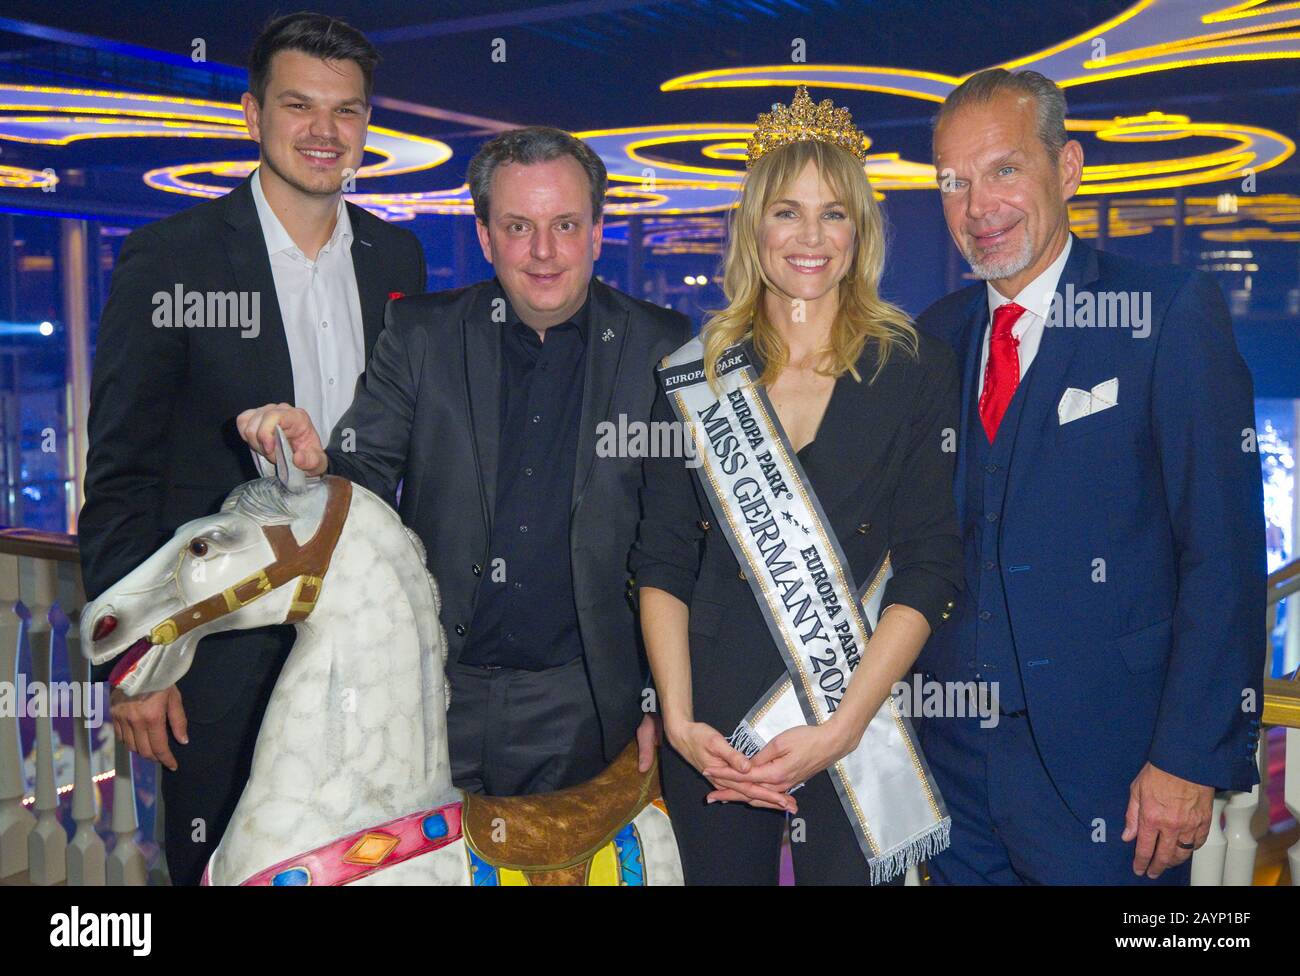 Rust, Germany. 15th Feb, 2020. Rust, Germany - February 15, 2020: Miss Germany Beauty Pageant Election at Europa-Park with Winner Leonie Charlotte von Hase, Miss Schleswig-Holstein and Max Klemmer, Ralf Klemmer, Michael Mack | usage worldwide Credit: dpa/Alamy Live News Stock Photo